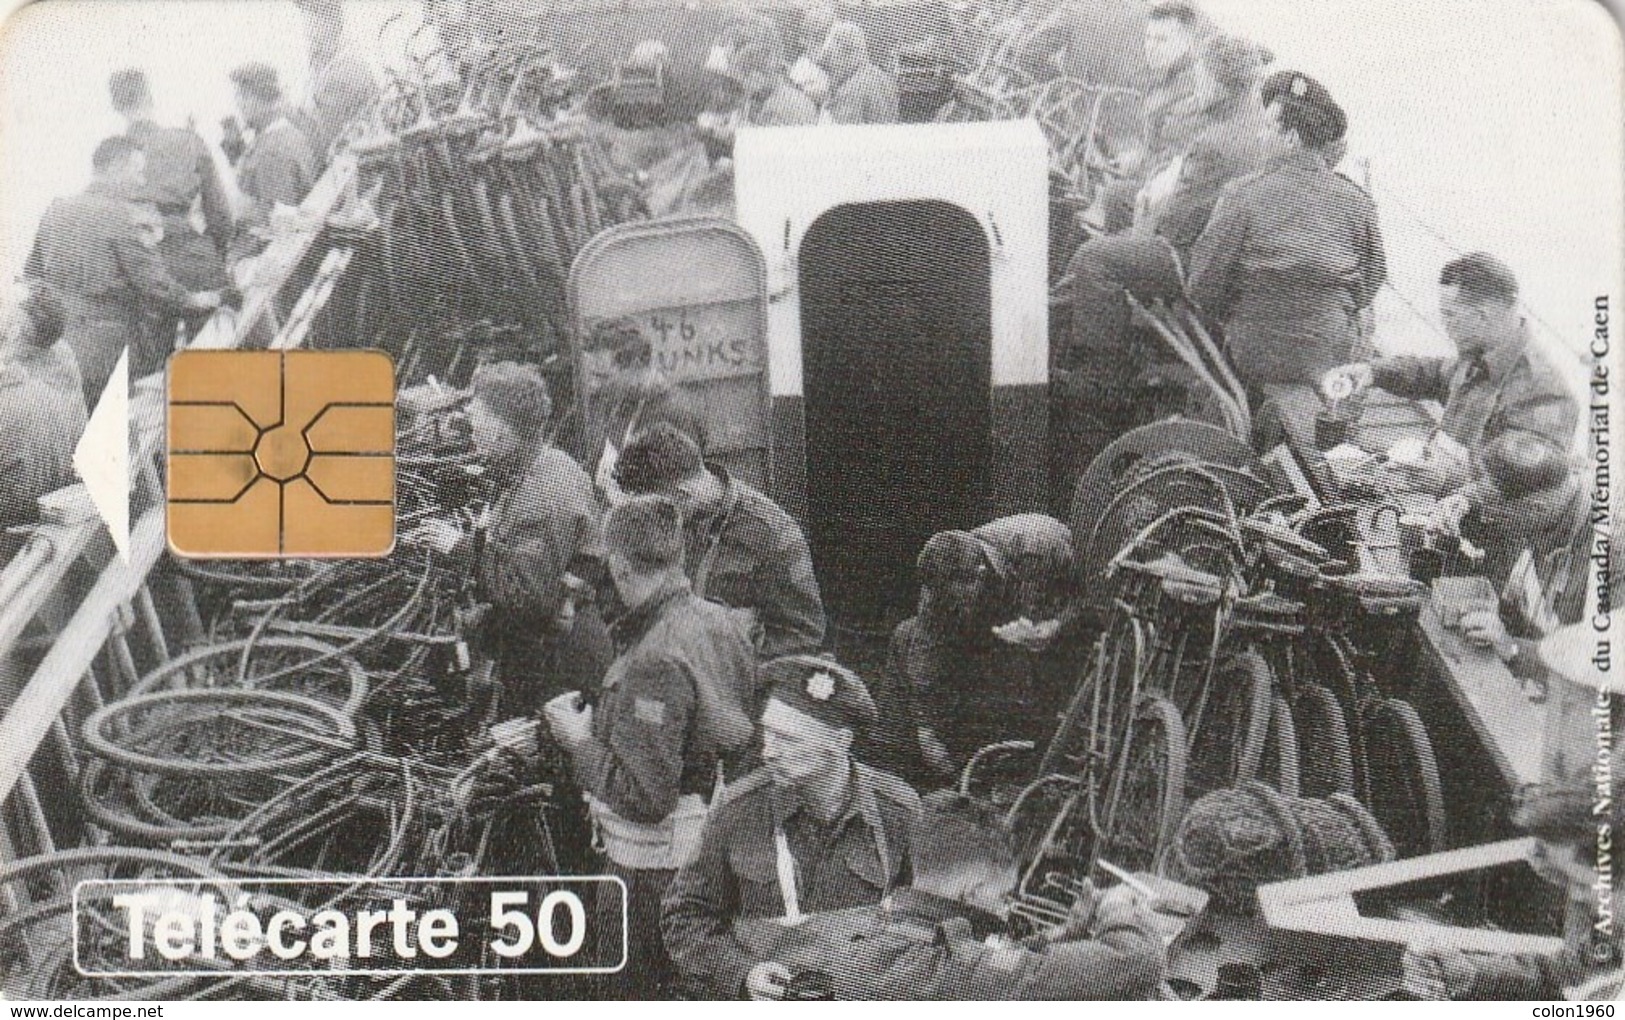 FRANCIA. 50th Anniversary Of Landings And The Liberation Of France. Debarquement Flotille. 0474. 06/94. (309). - Armée